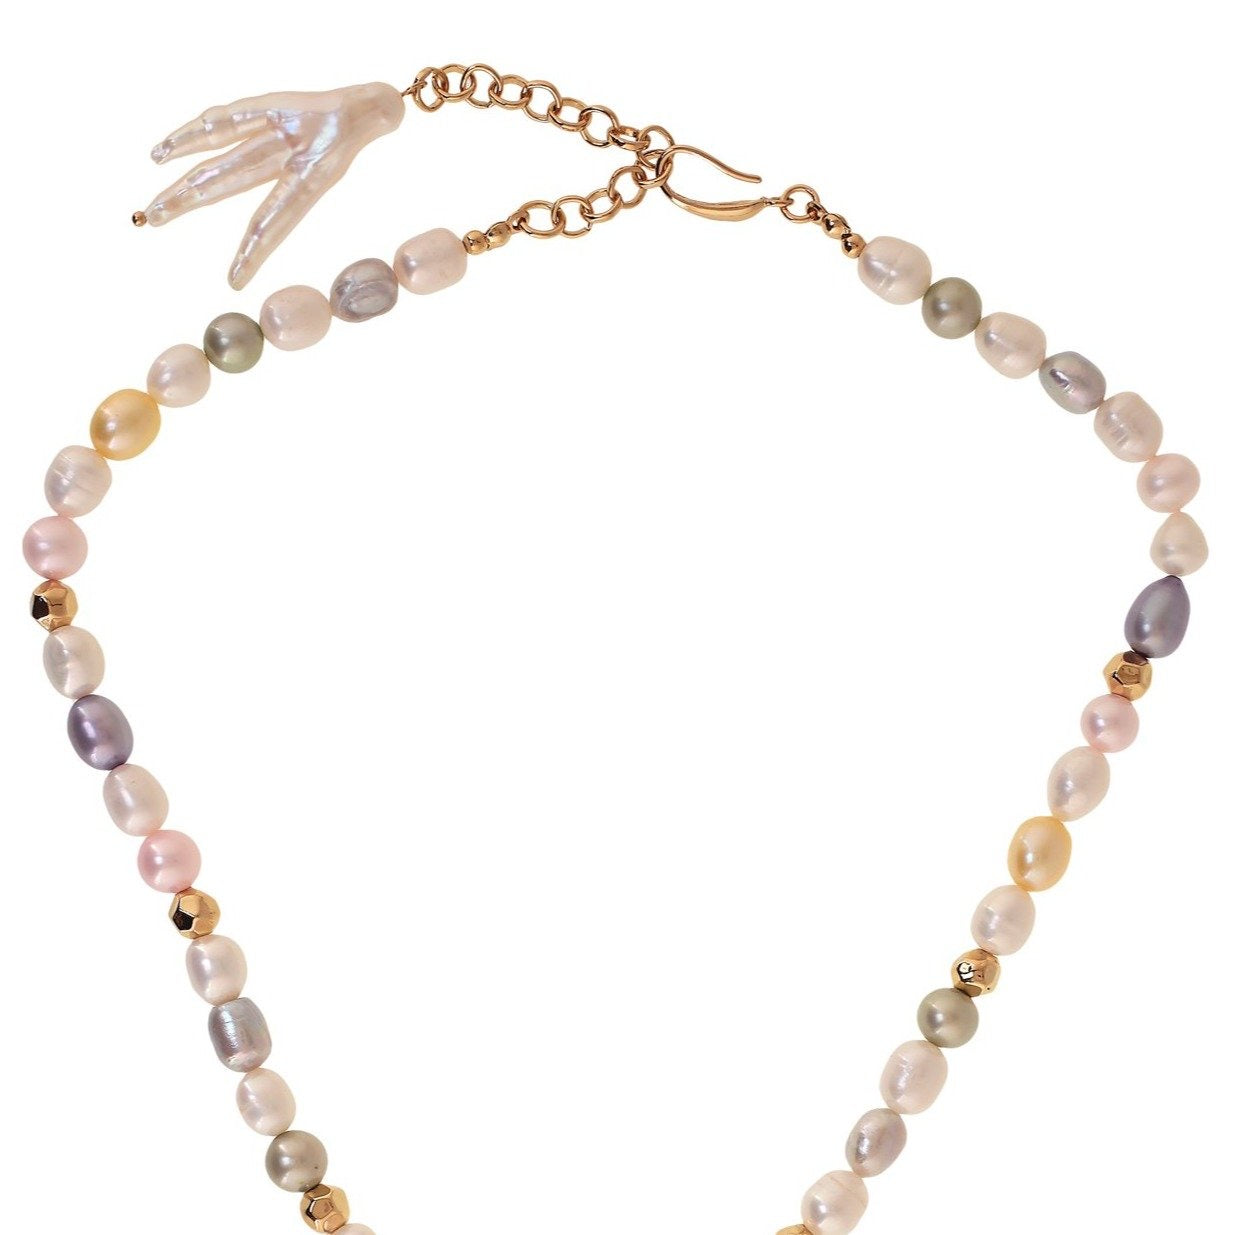 'PENINSULA' COLORED PEARLS TIE NECKLACE